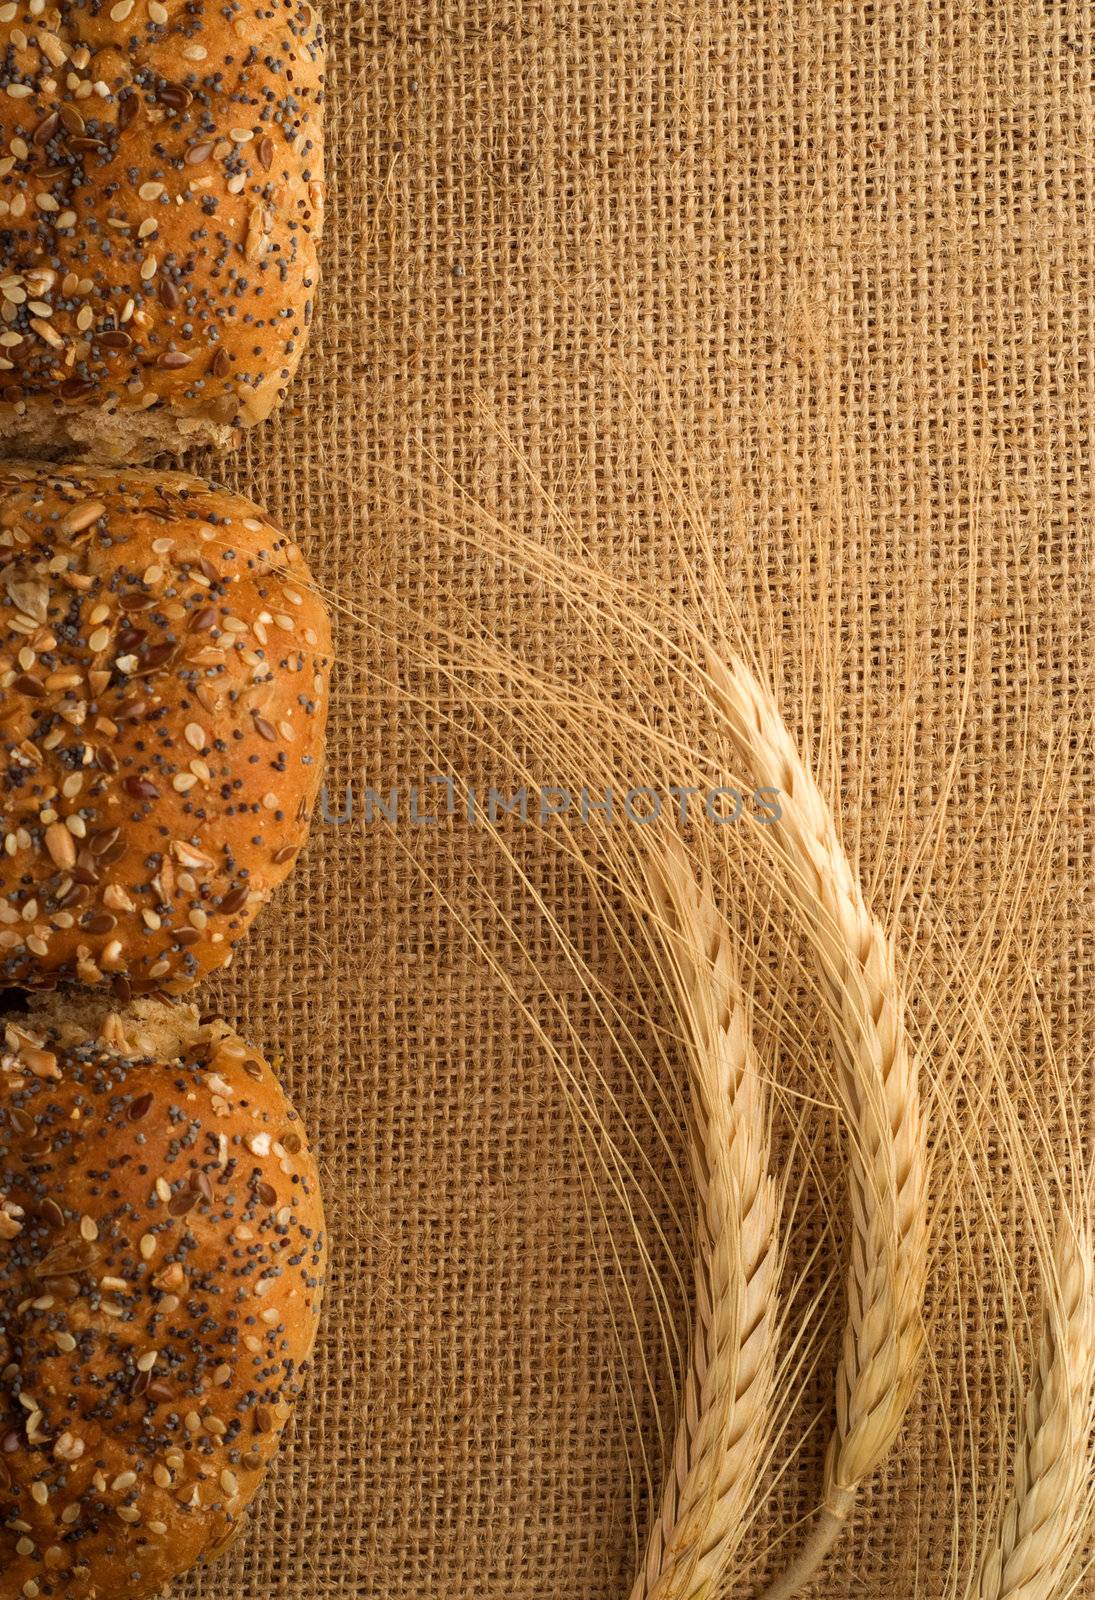 Bread with Wheat